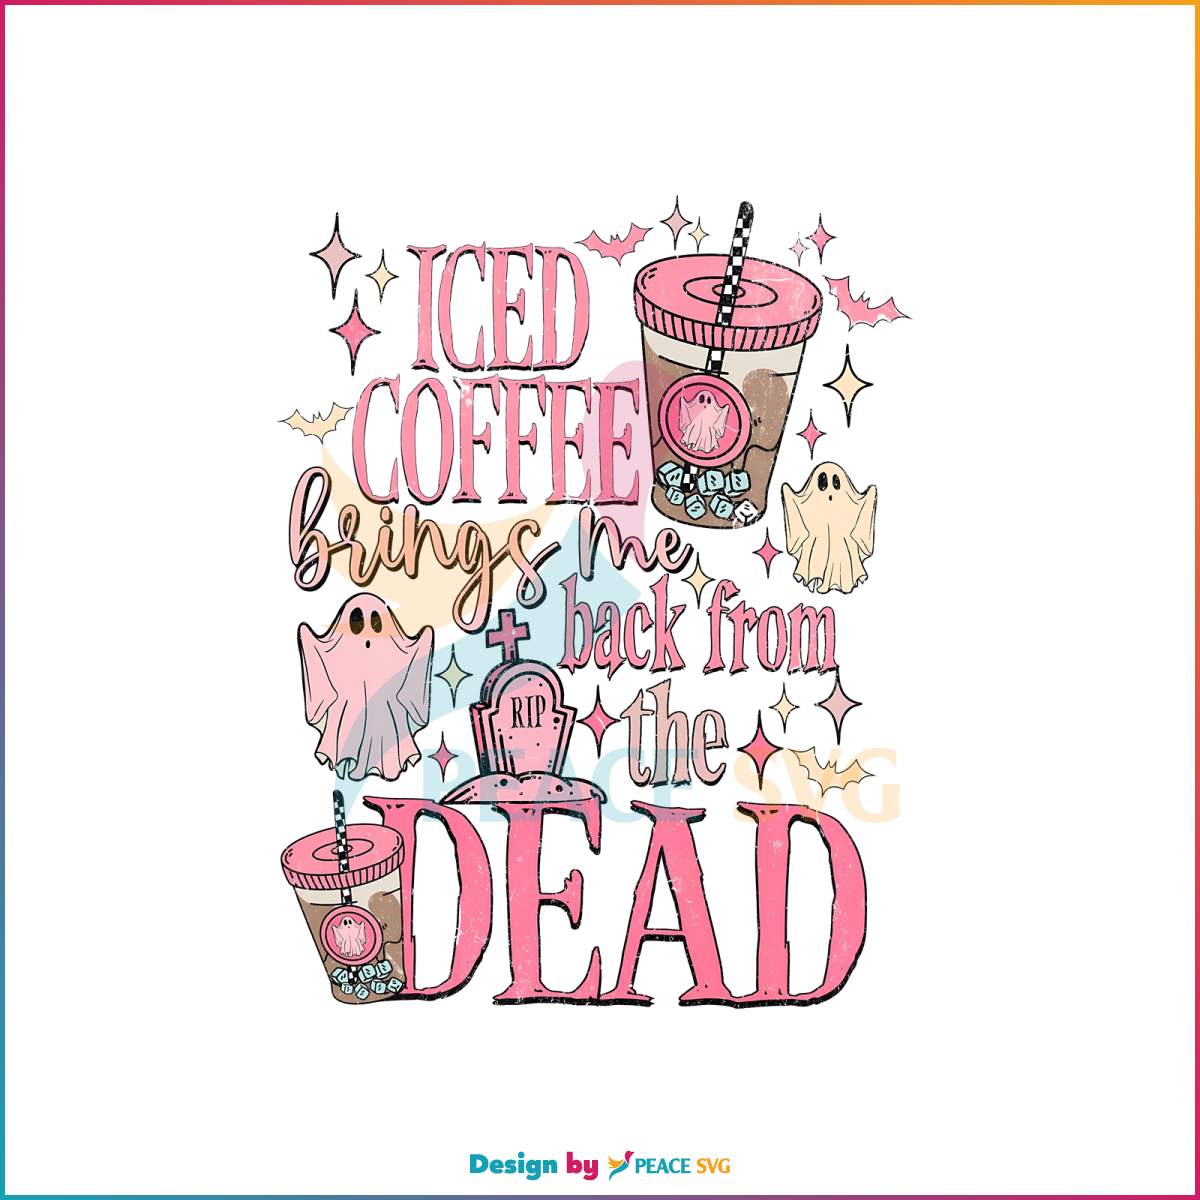 retro-halloween-iced-coffee-brings-me-back-from-dead-png